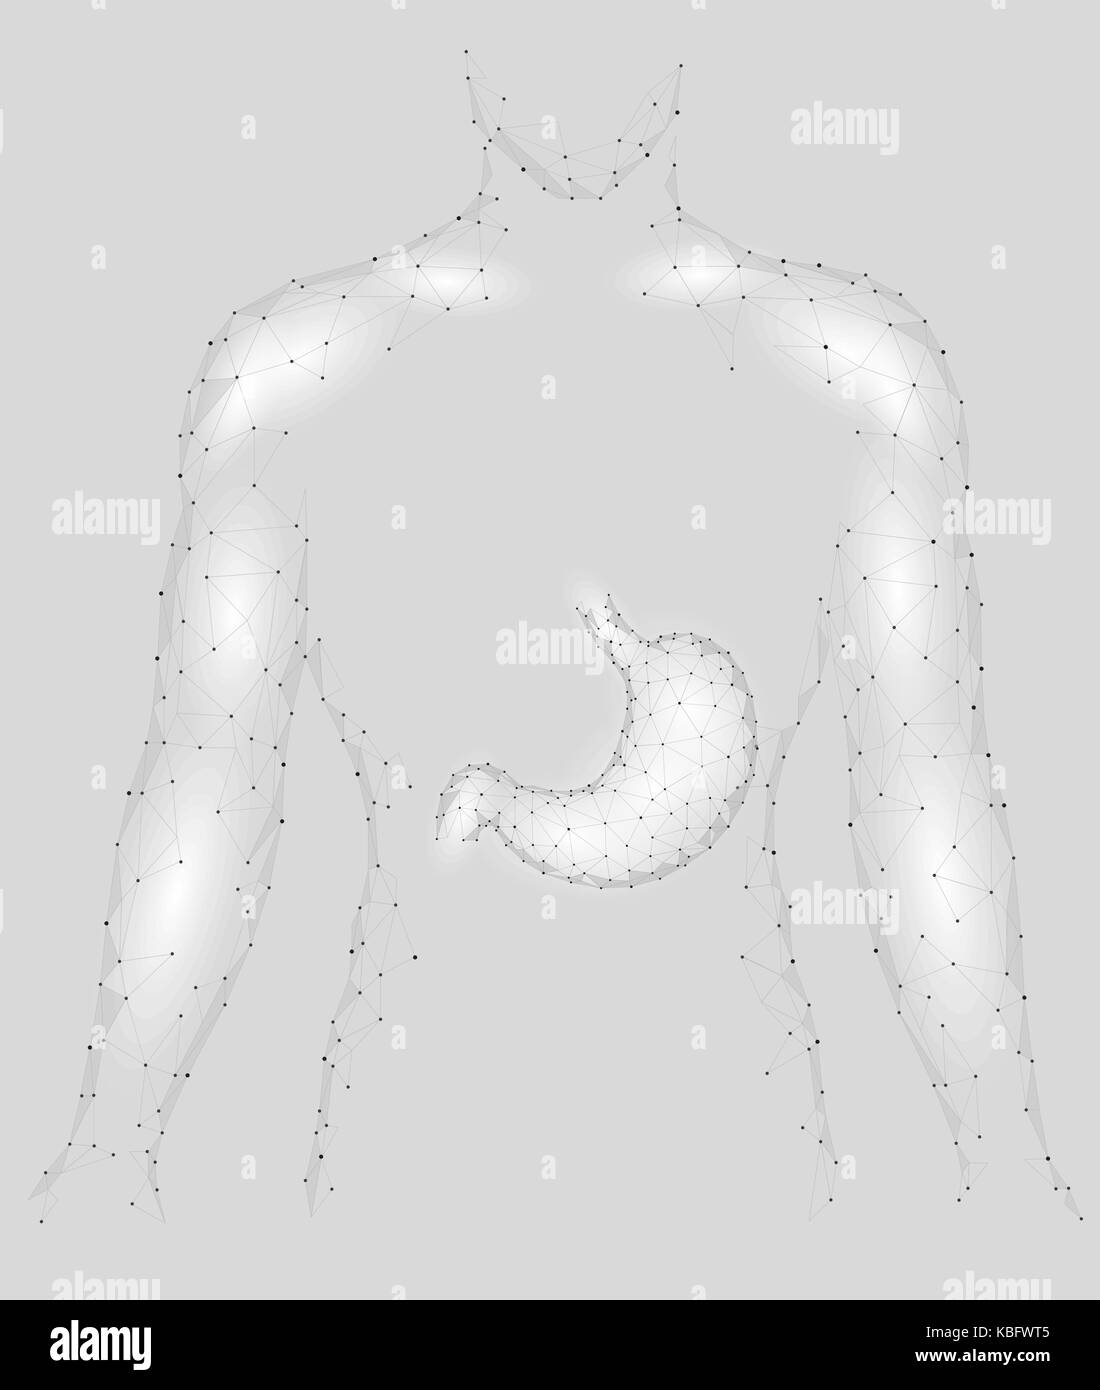 Human healthy stomach inside man sikhouette. Internal digestion organ. Low poly connected dots gray white triangle future technology design background vector medicine illustration Stock Vector